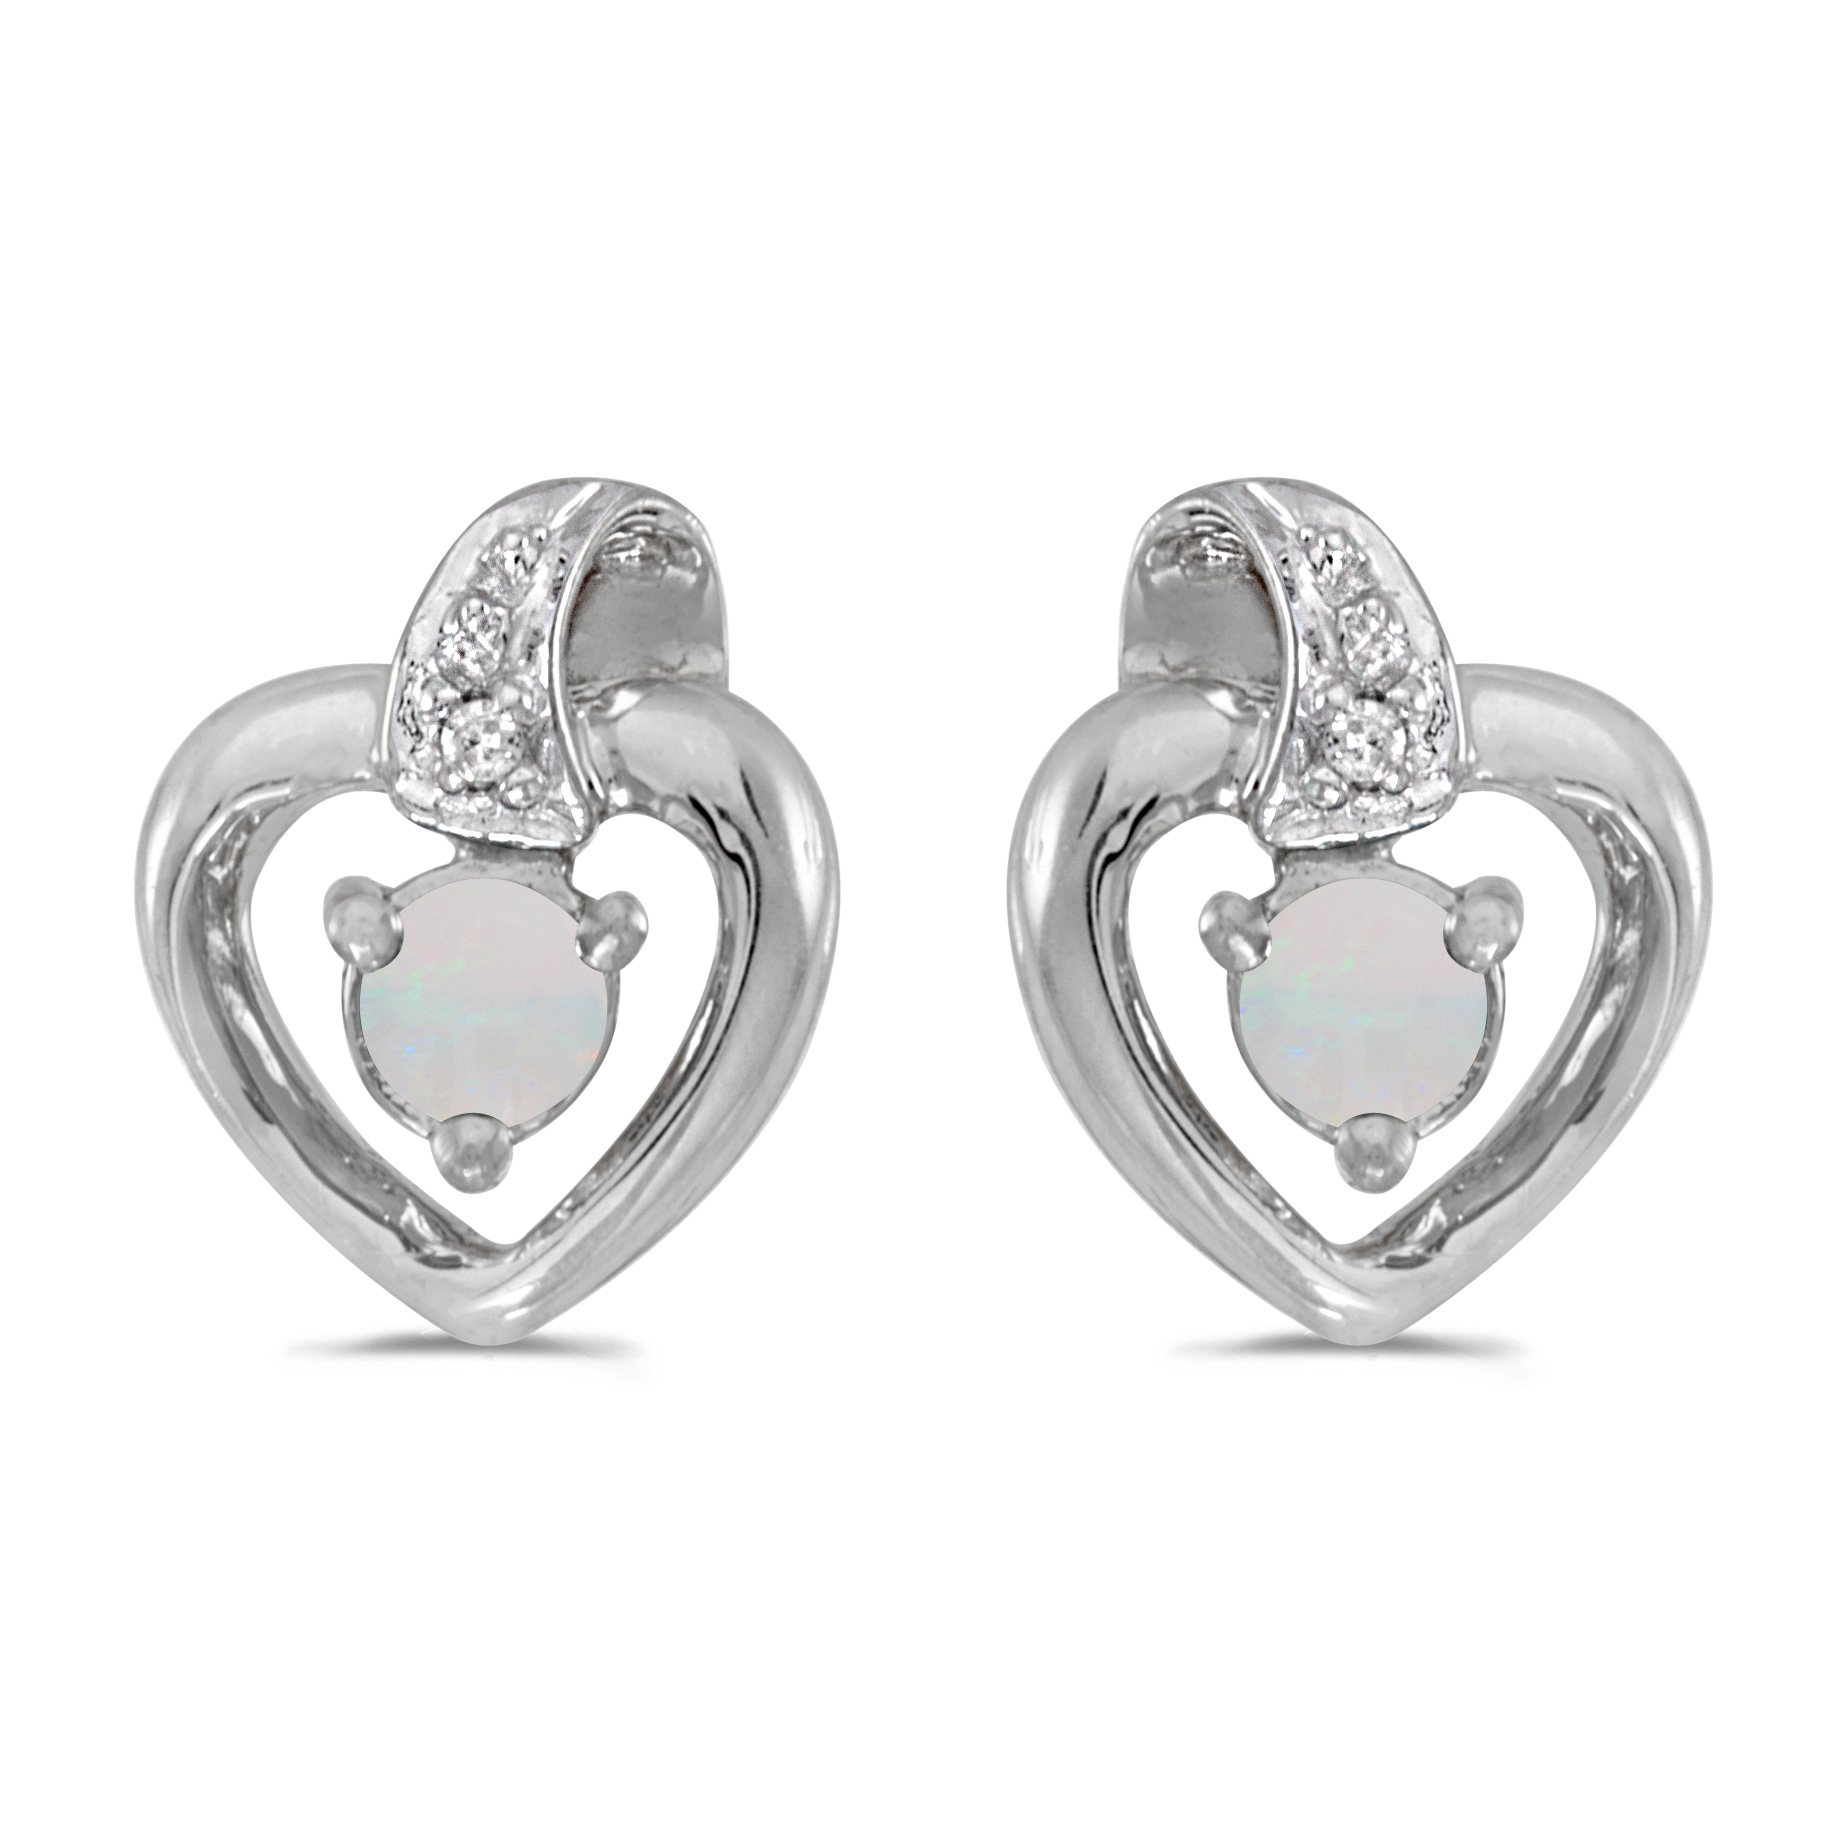 DIRECT-JEWELRY DON'T FORGET THE DASH 14k White Gold Round Opal And Diamond Heart Earrings